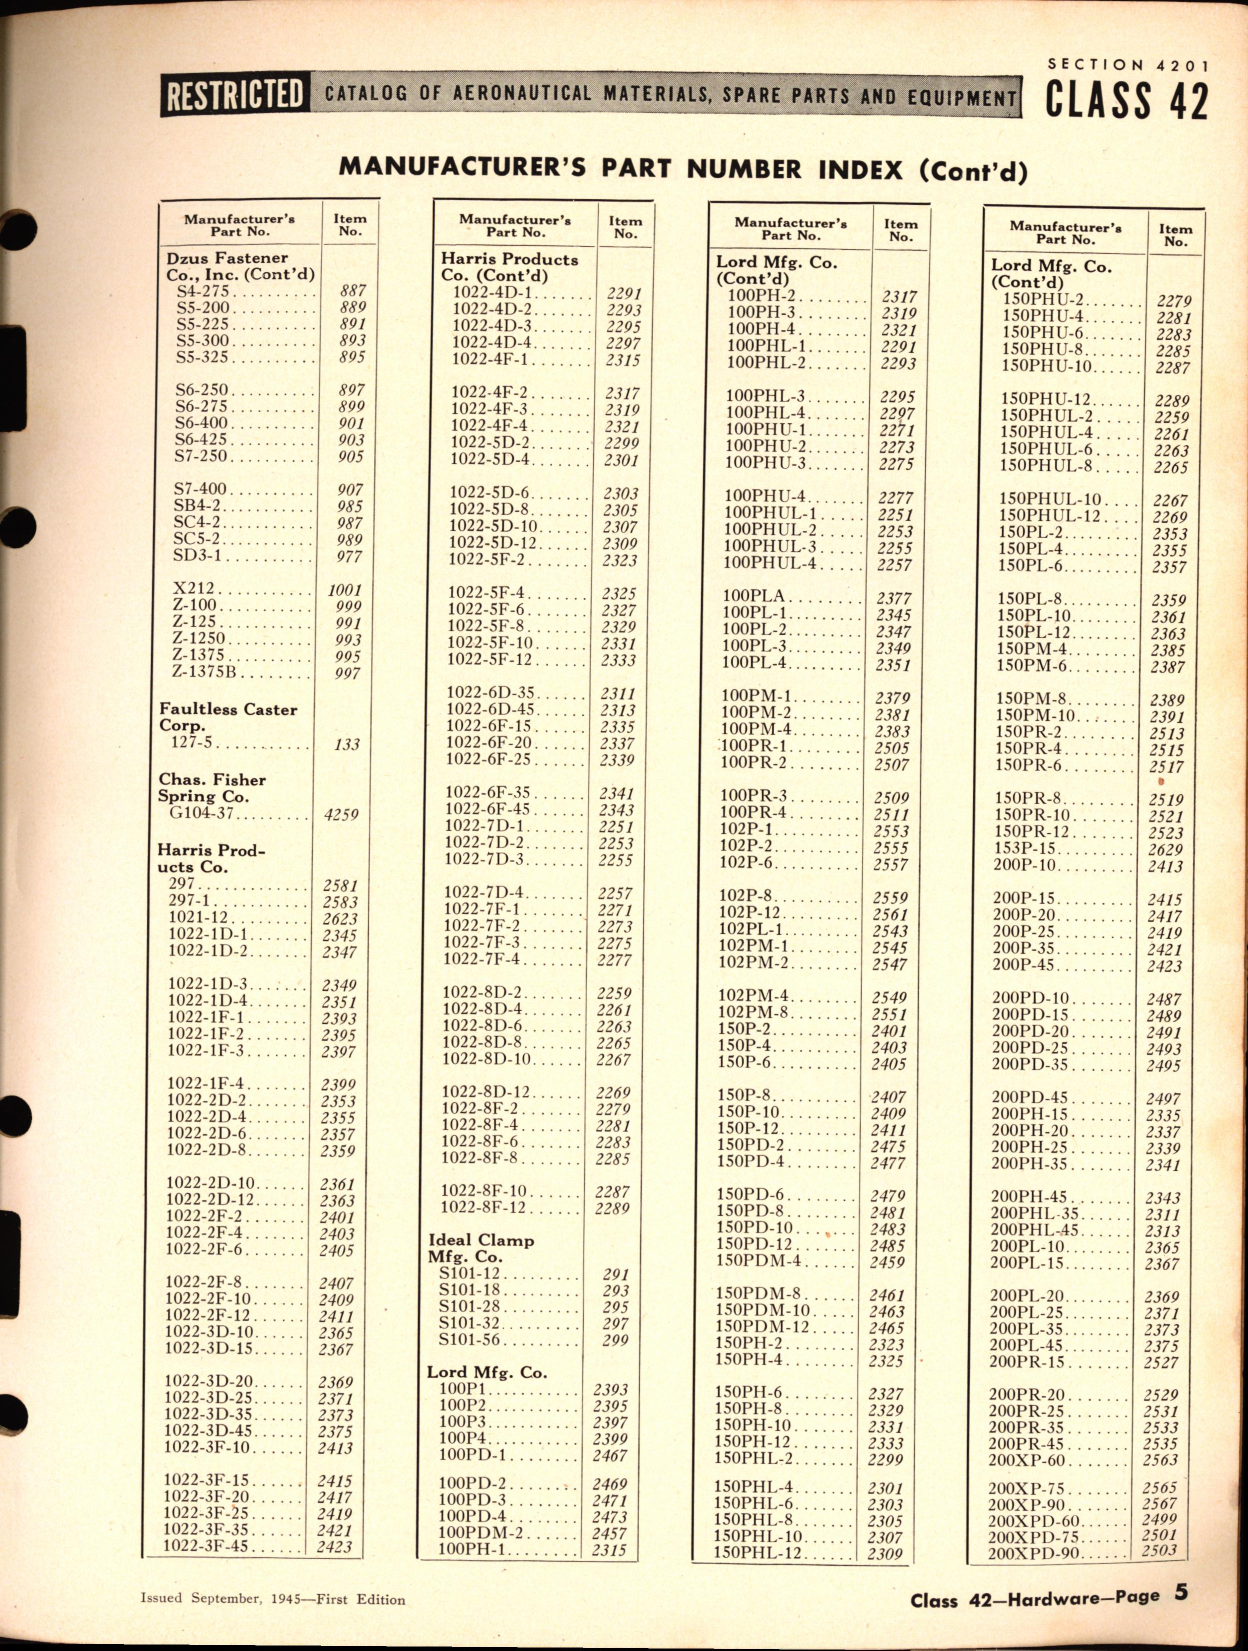 Sample page 5 from AirCorps Library document: Hardware